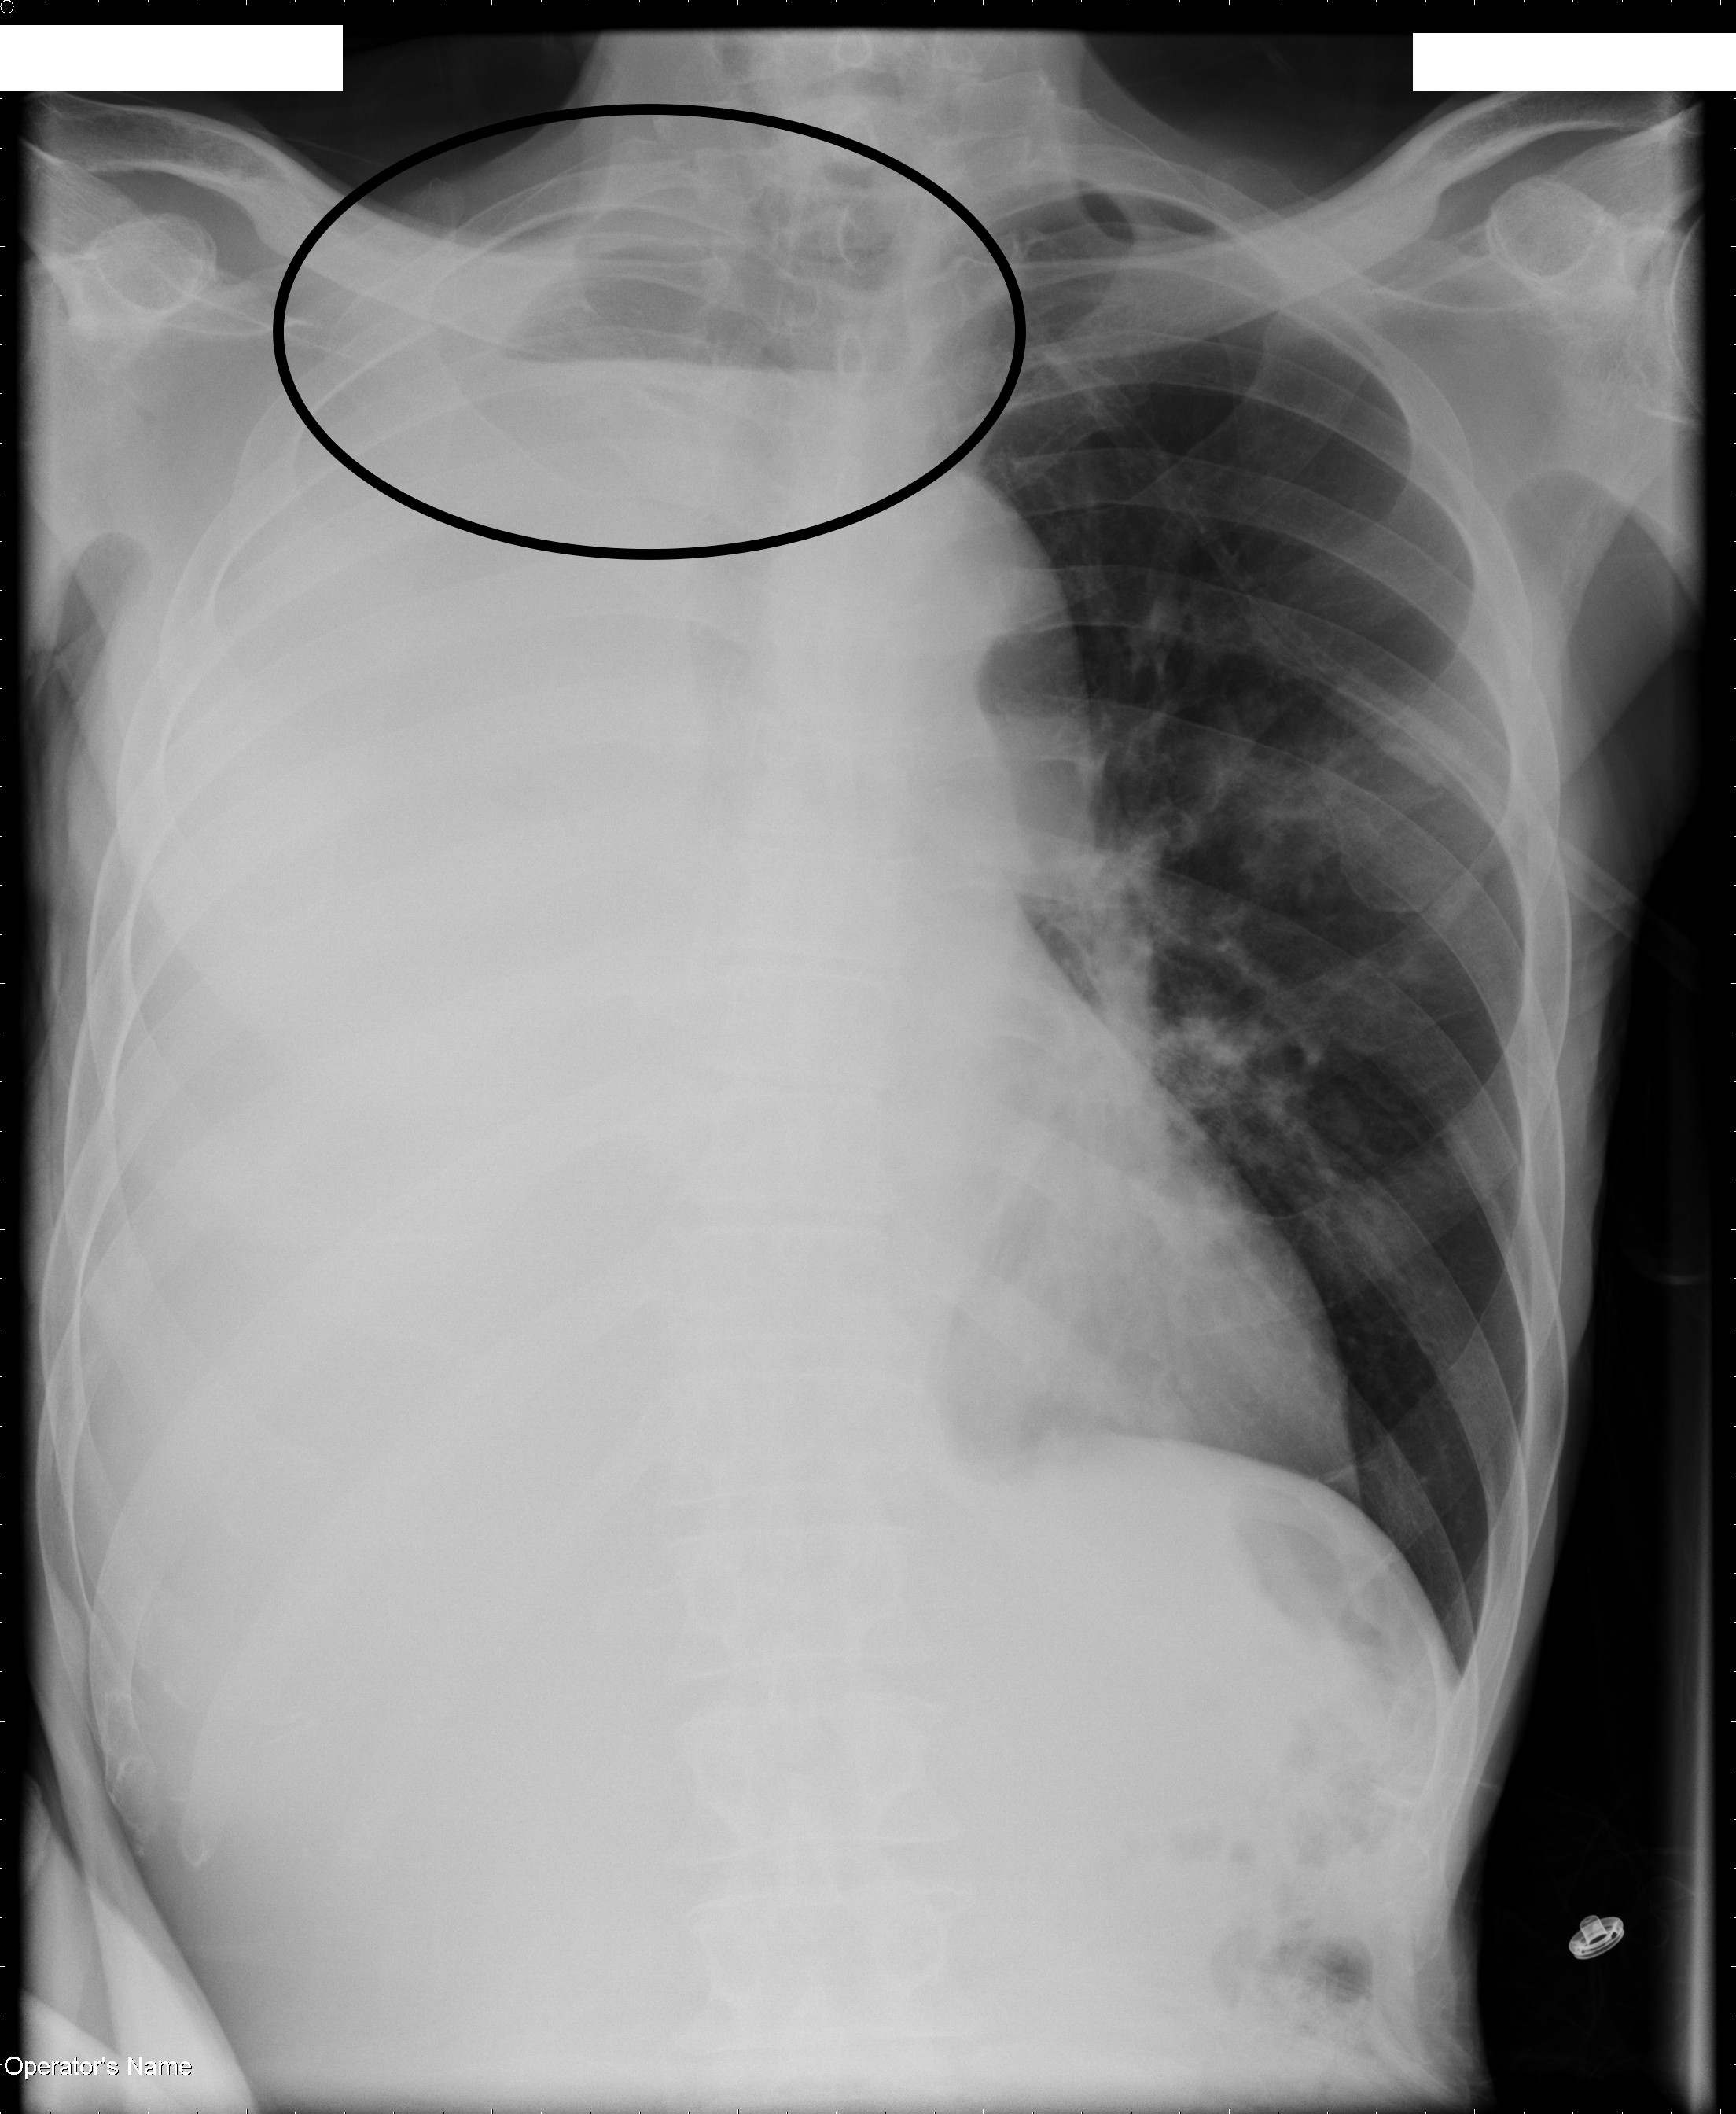 At the right apex of the lung we can clearly see an air fluid level that strongly suggests that this hemithorax opacification is caused by a large pleural effusion (source). 